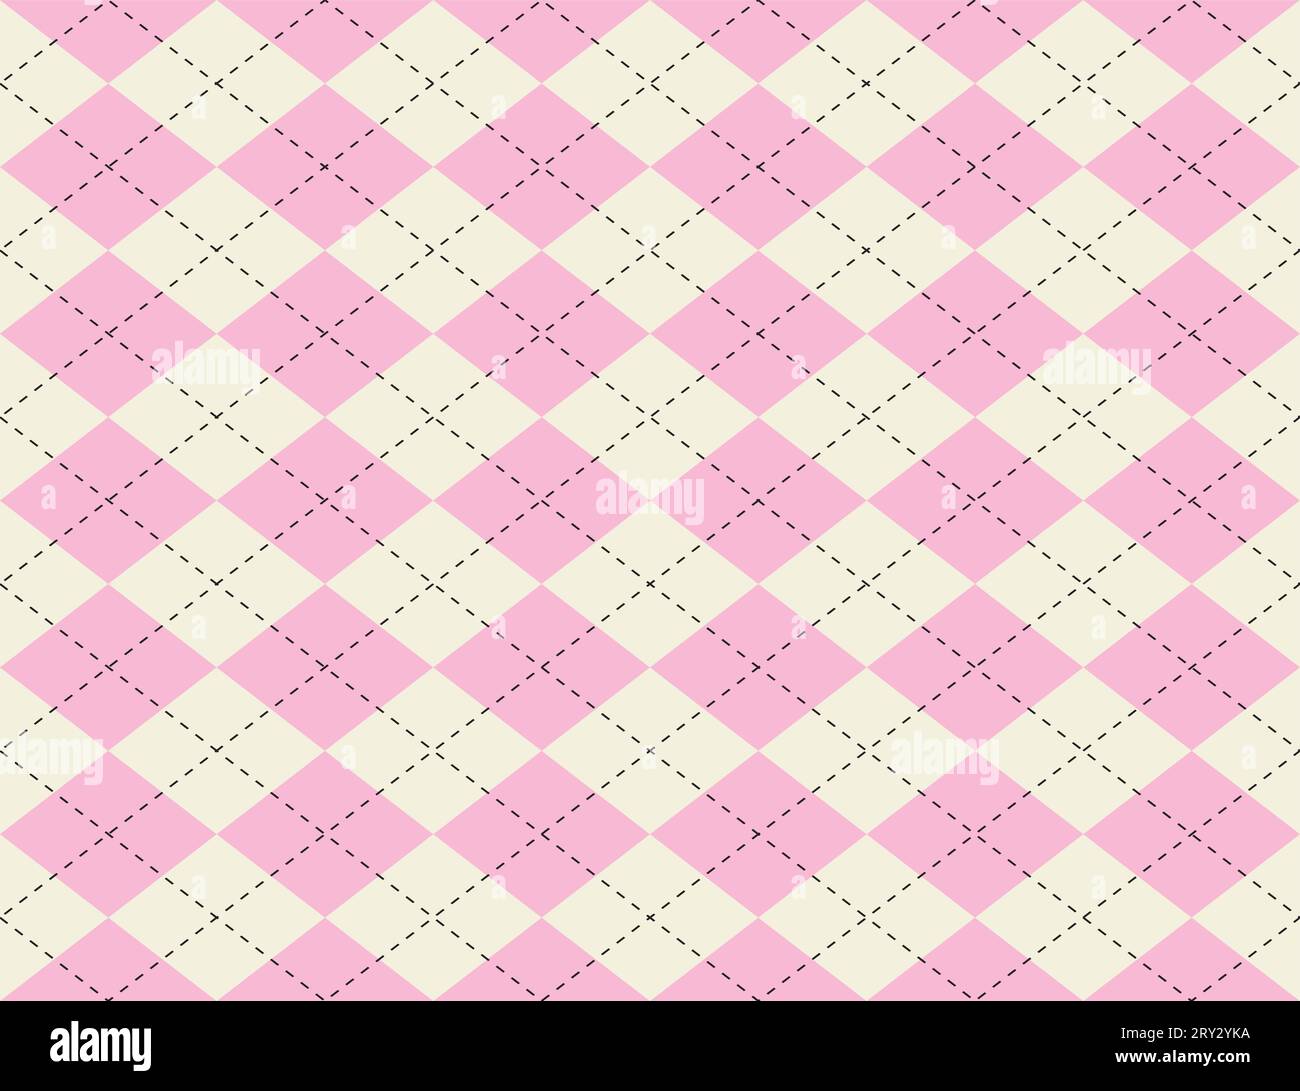 Argyle seamless pattern. Pink, white, black color. Stock Vector